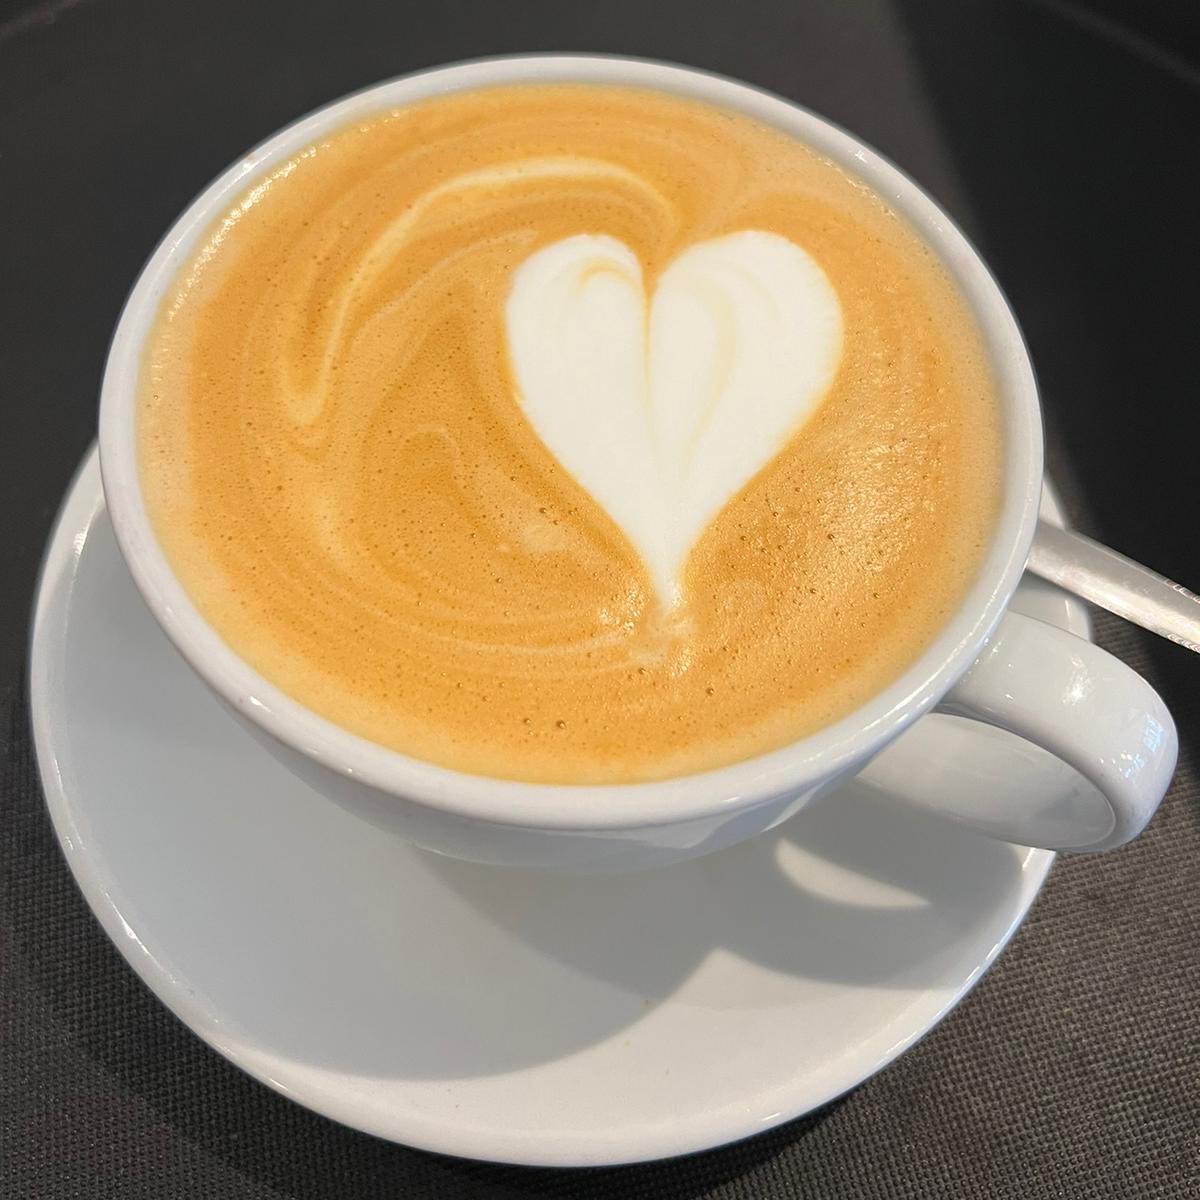 Happy Valentines Day! ♥️ Our team have been practising their hearts ☕️